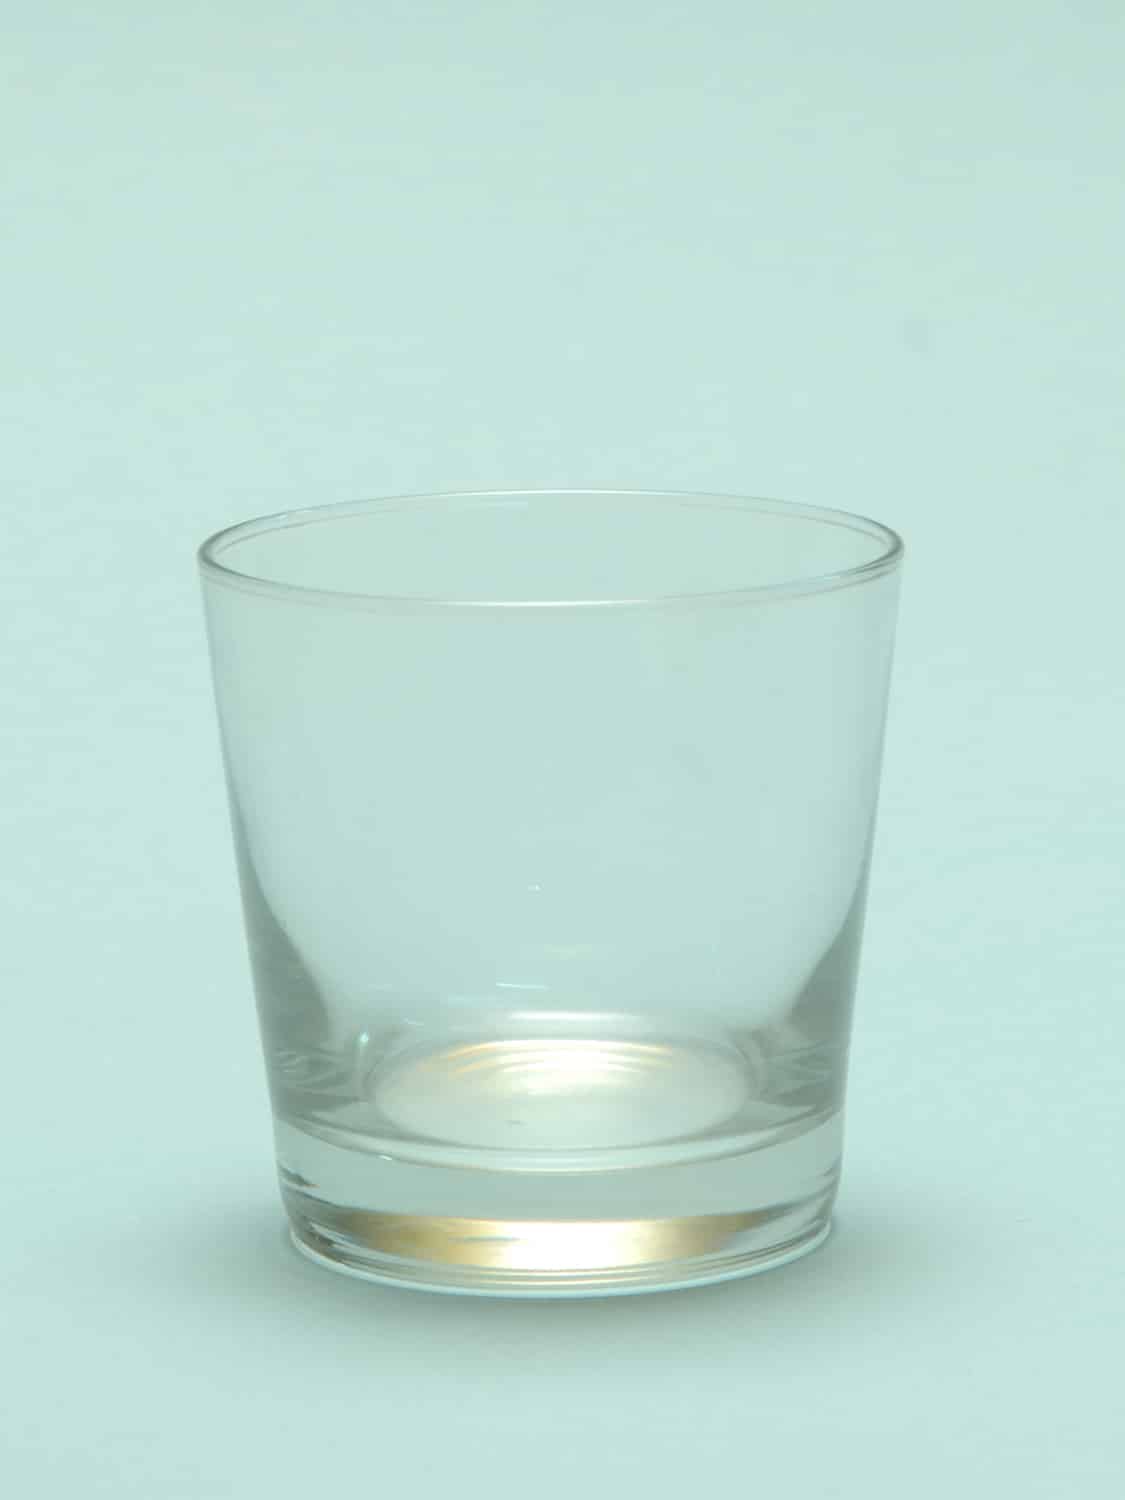 Sugar glass for film, video recordings. Whiskey glass smooth conical, H * W 8.2 x 8.3 cm.